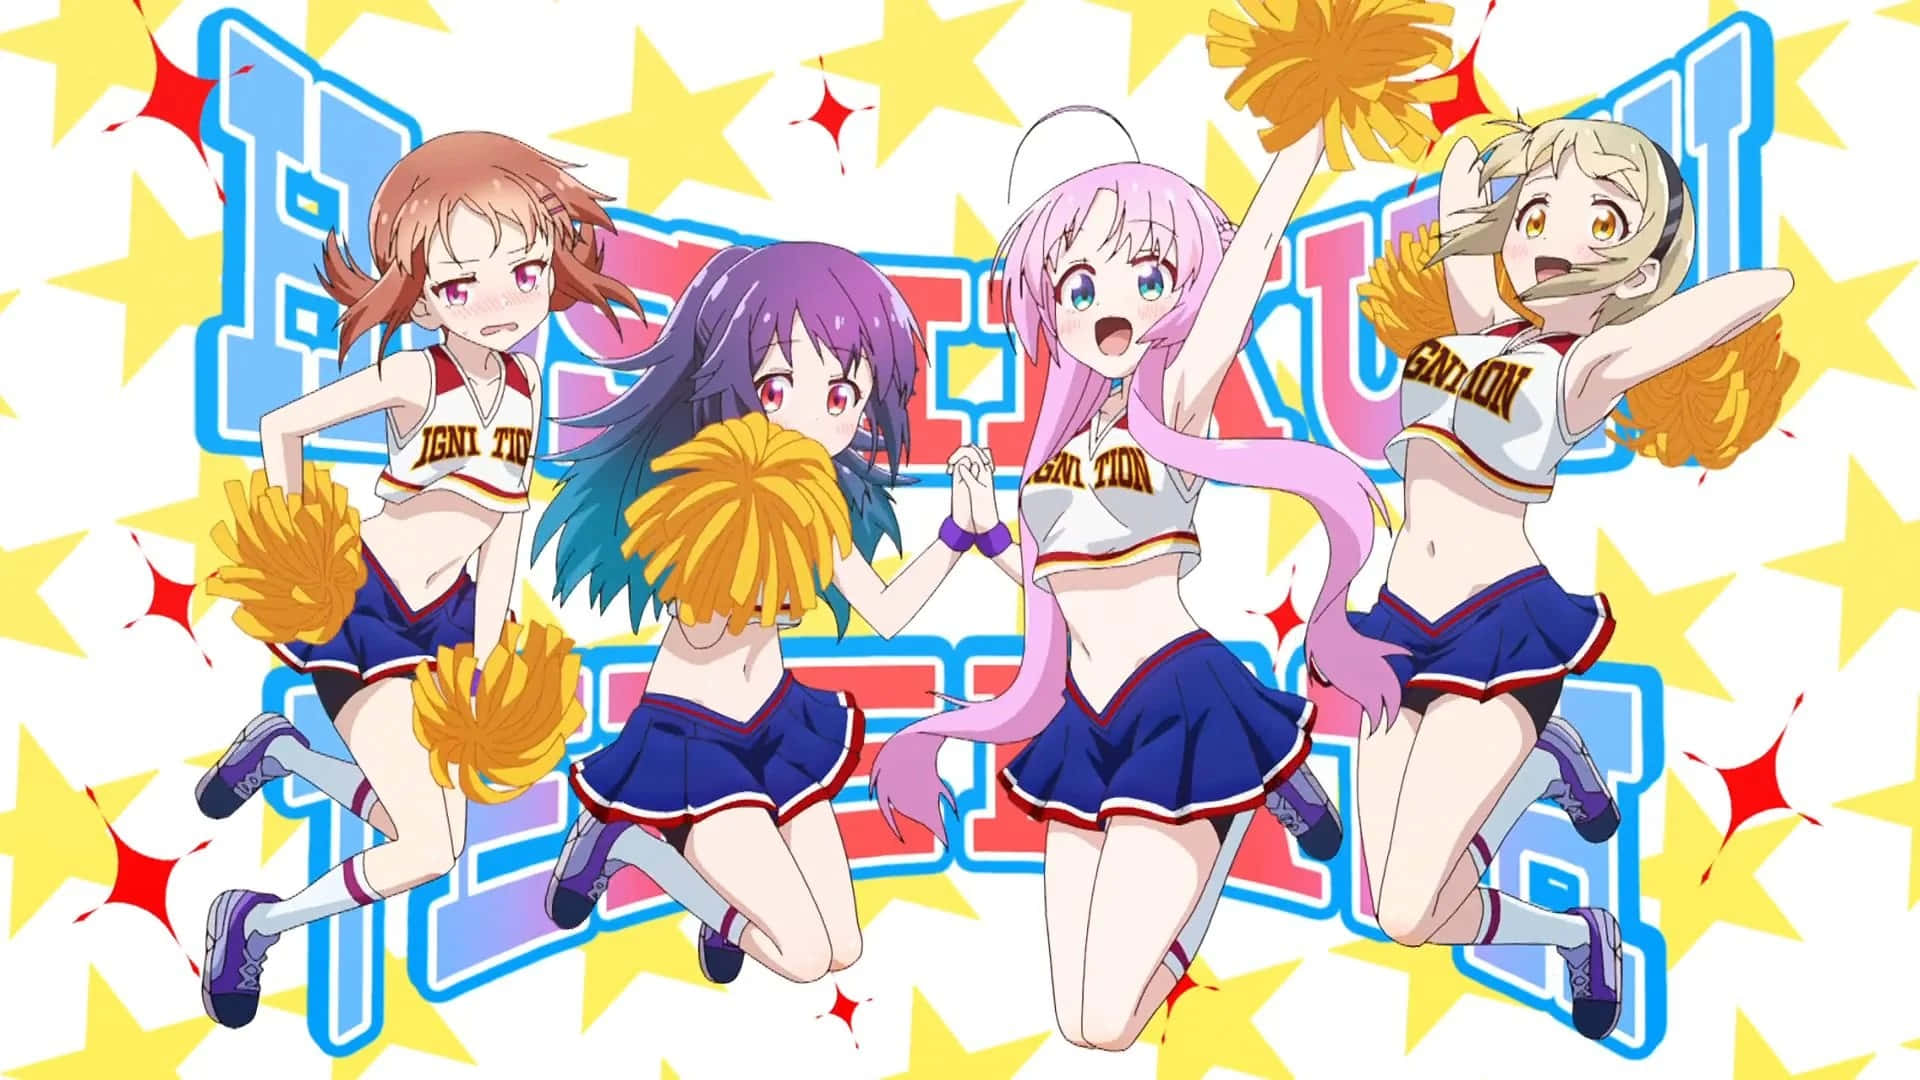 Animated Cheerleading Team Jumping Excitement Wallpaper